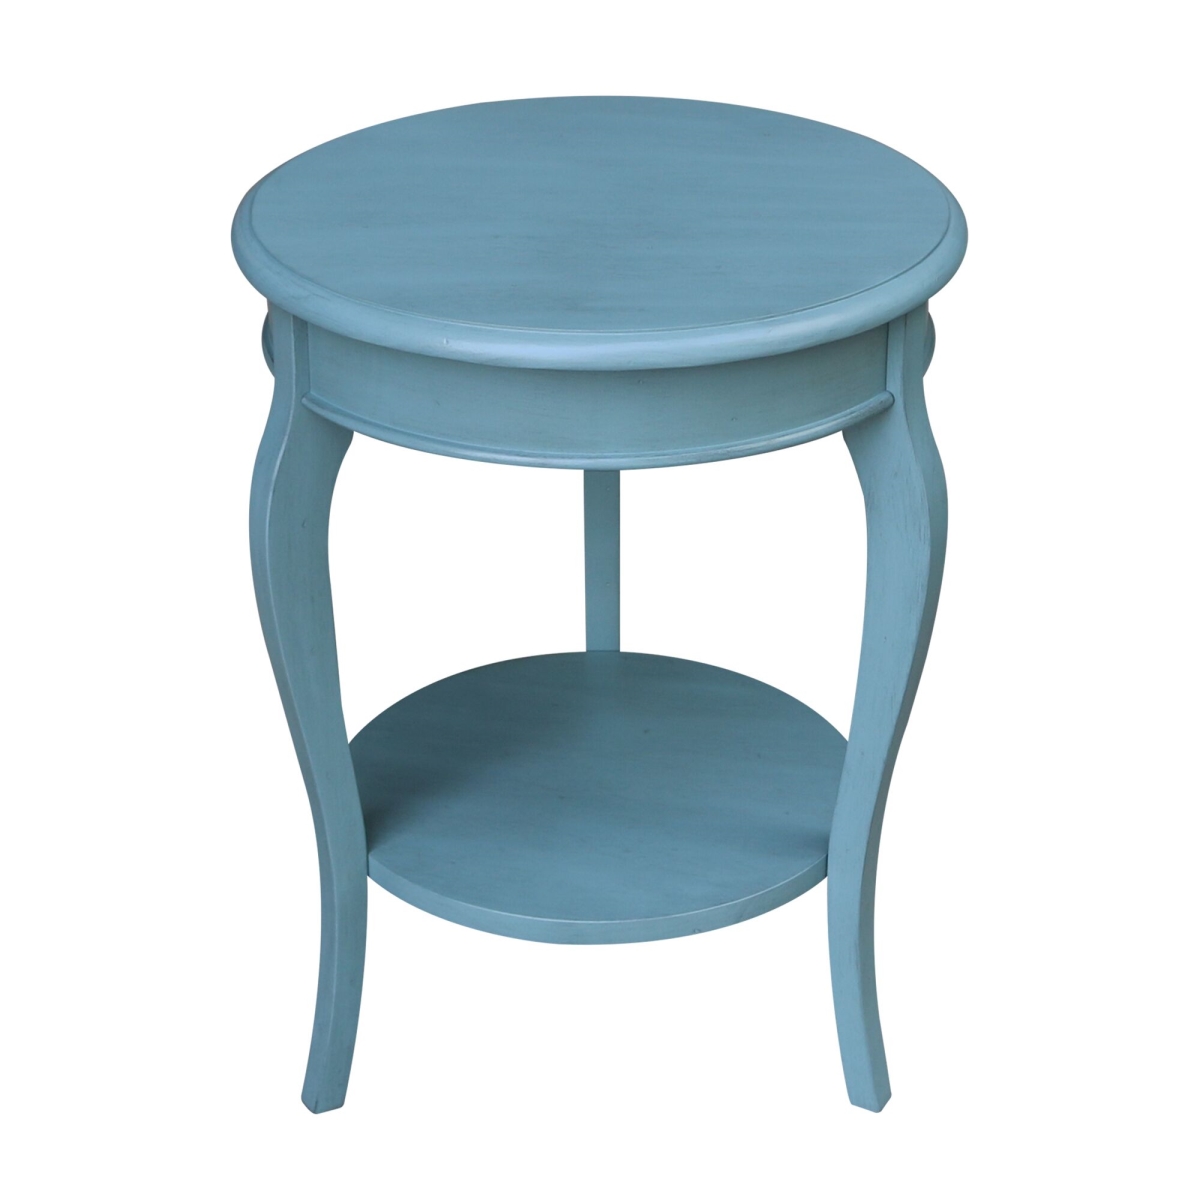 Ot32-18r-18 Cambria Round End Table, Ocean Blue - Antique Rubbed